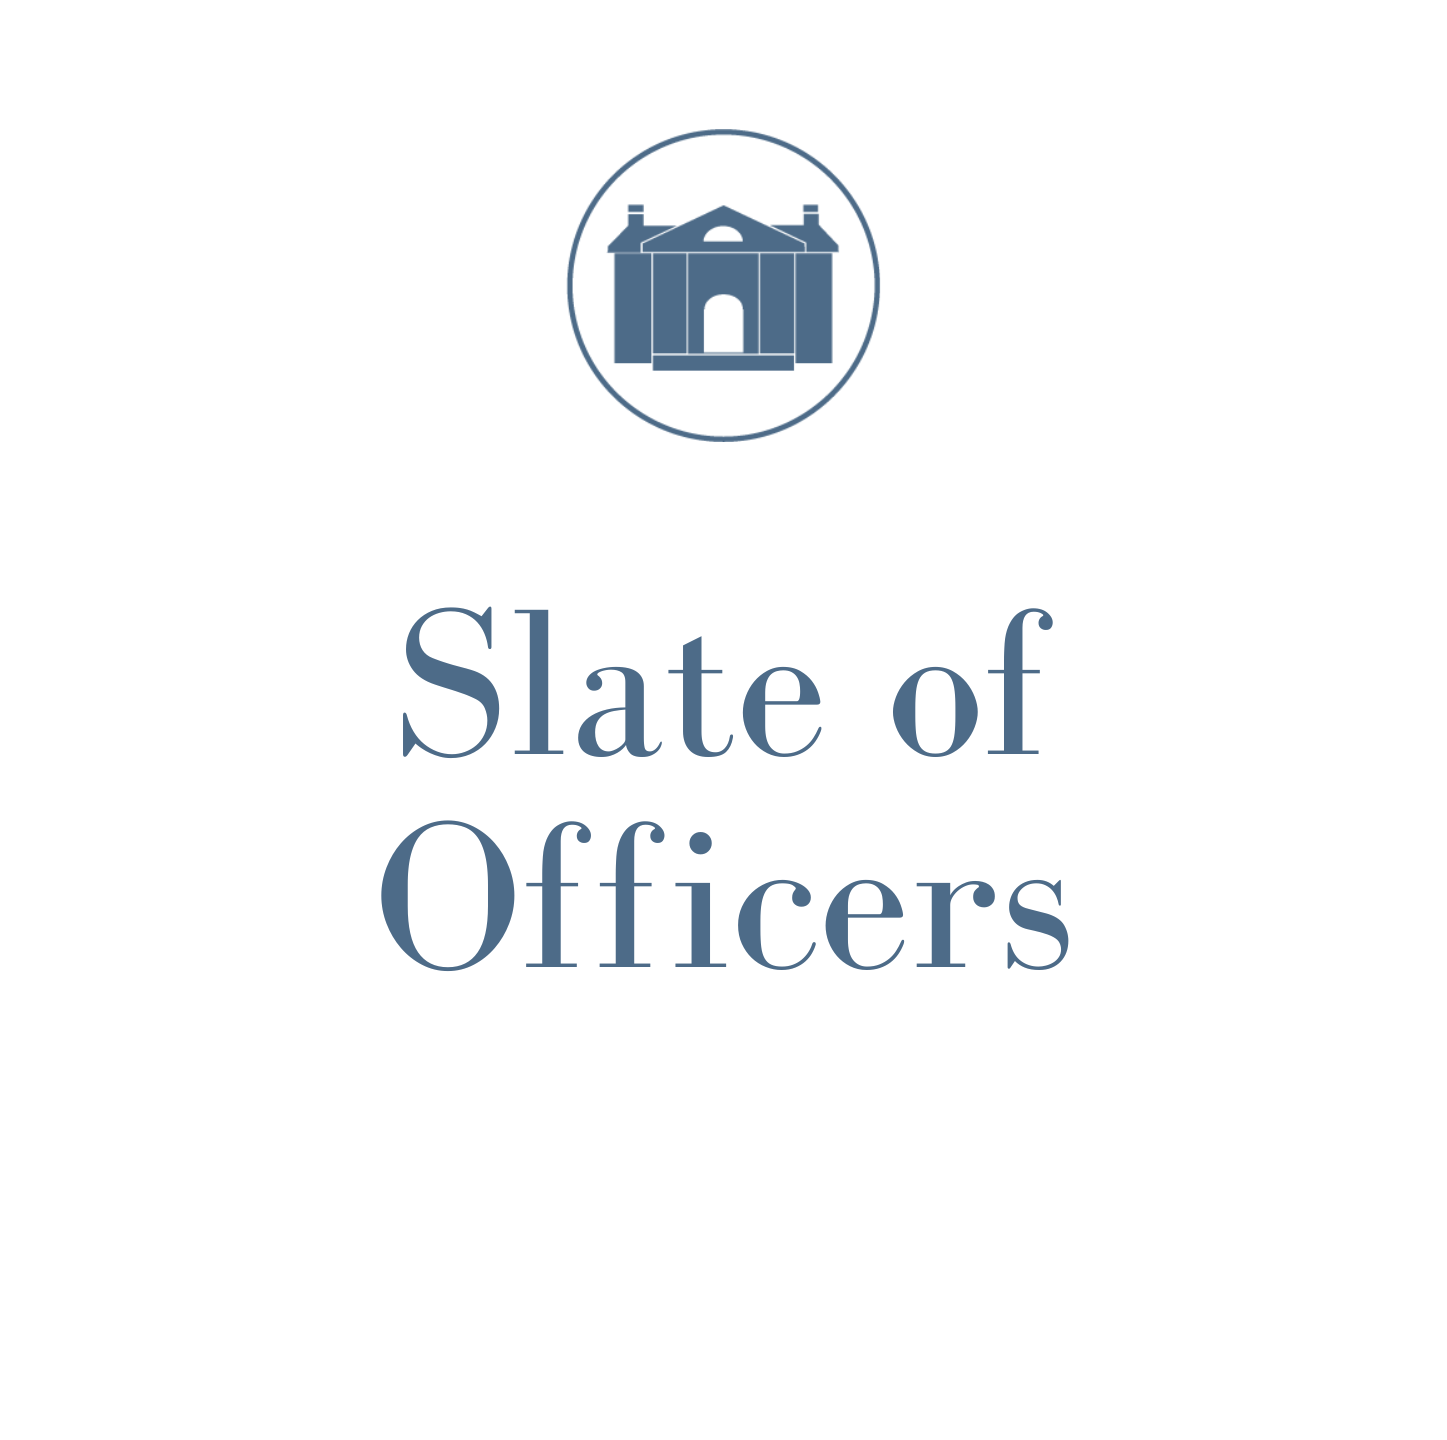 Slate of Officers